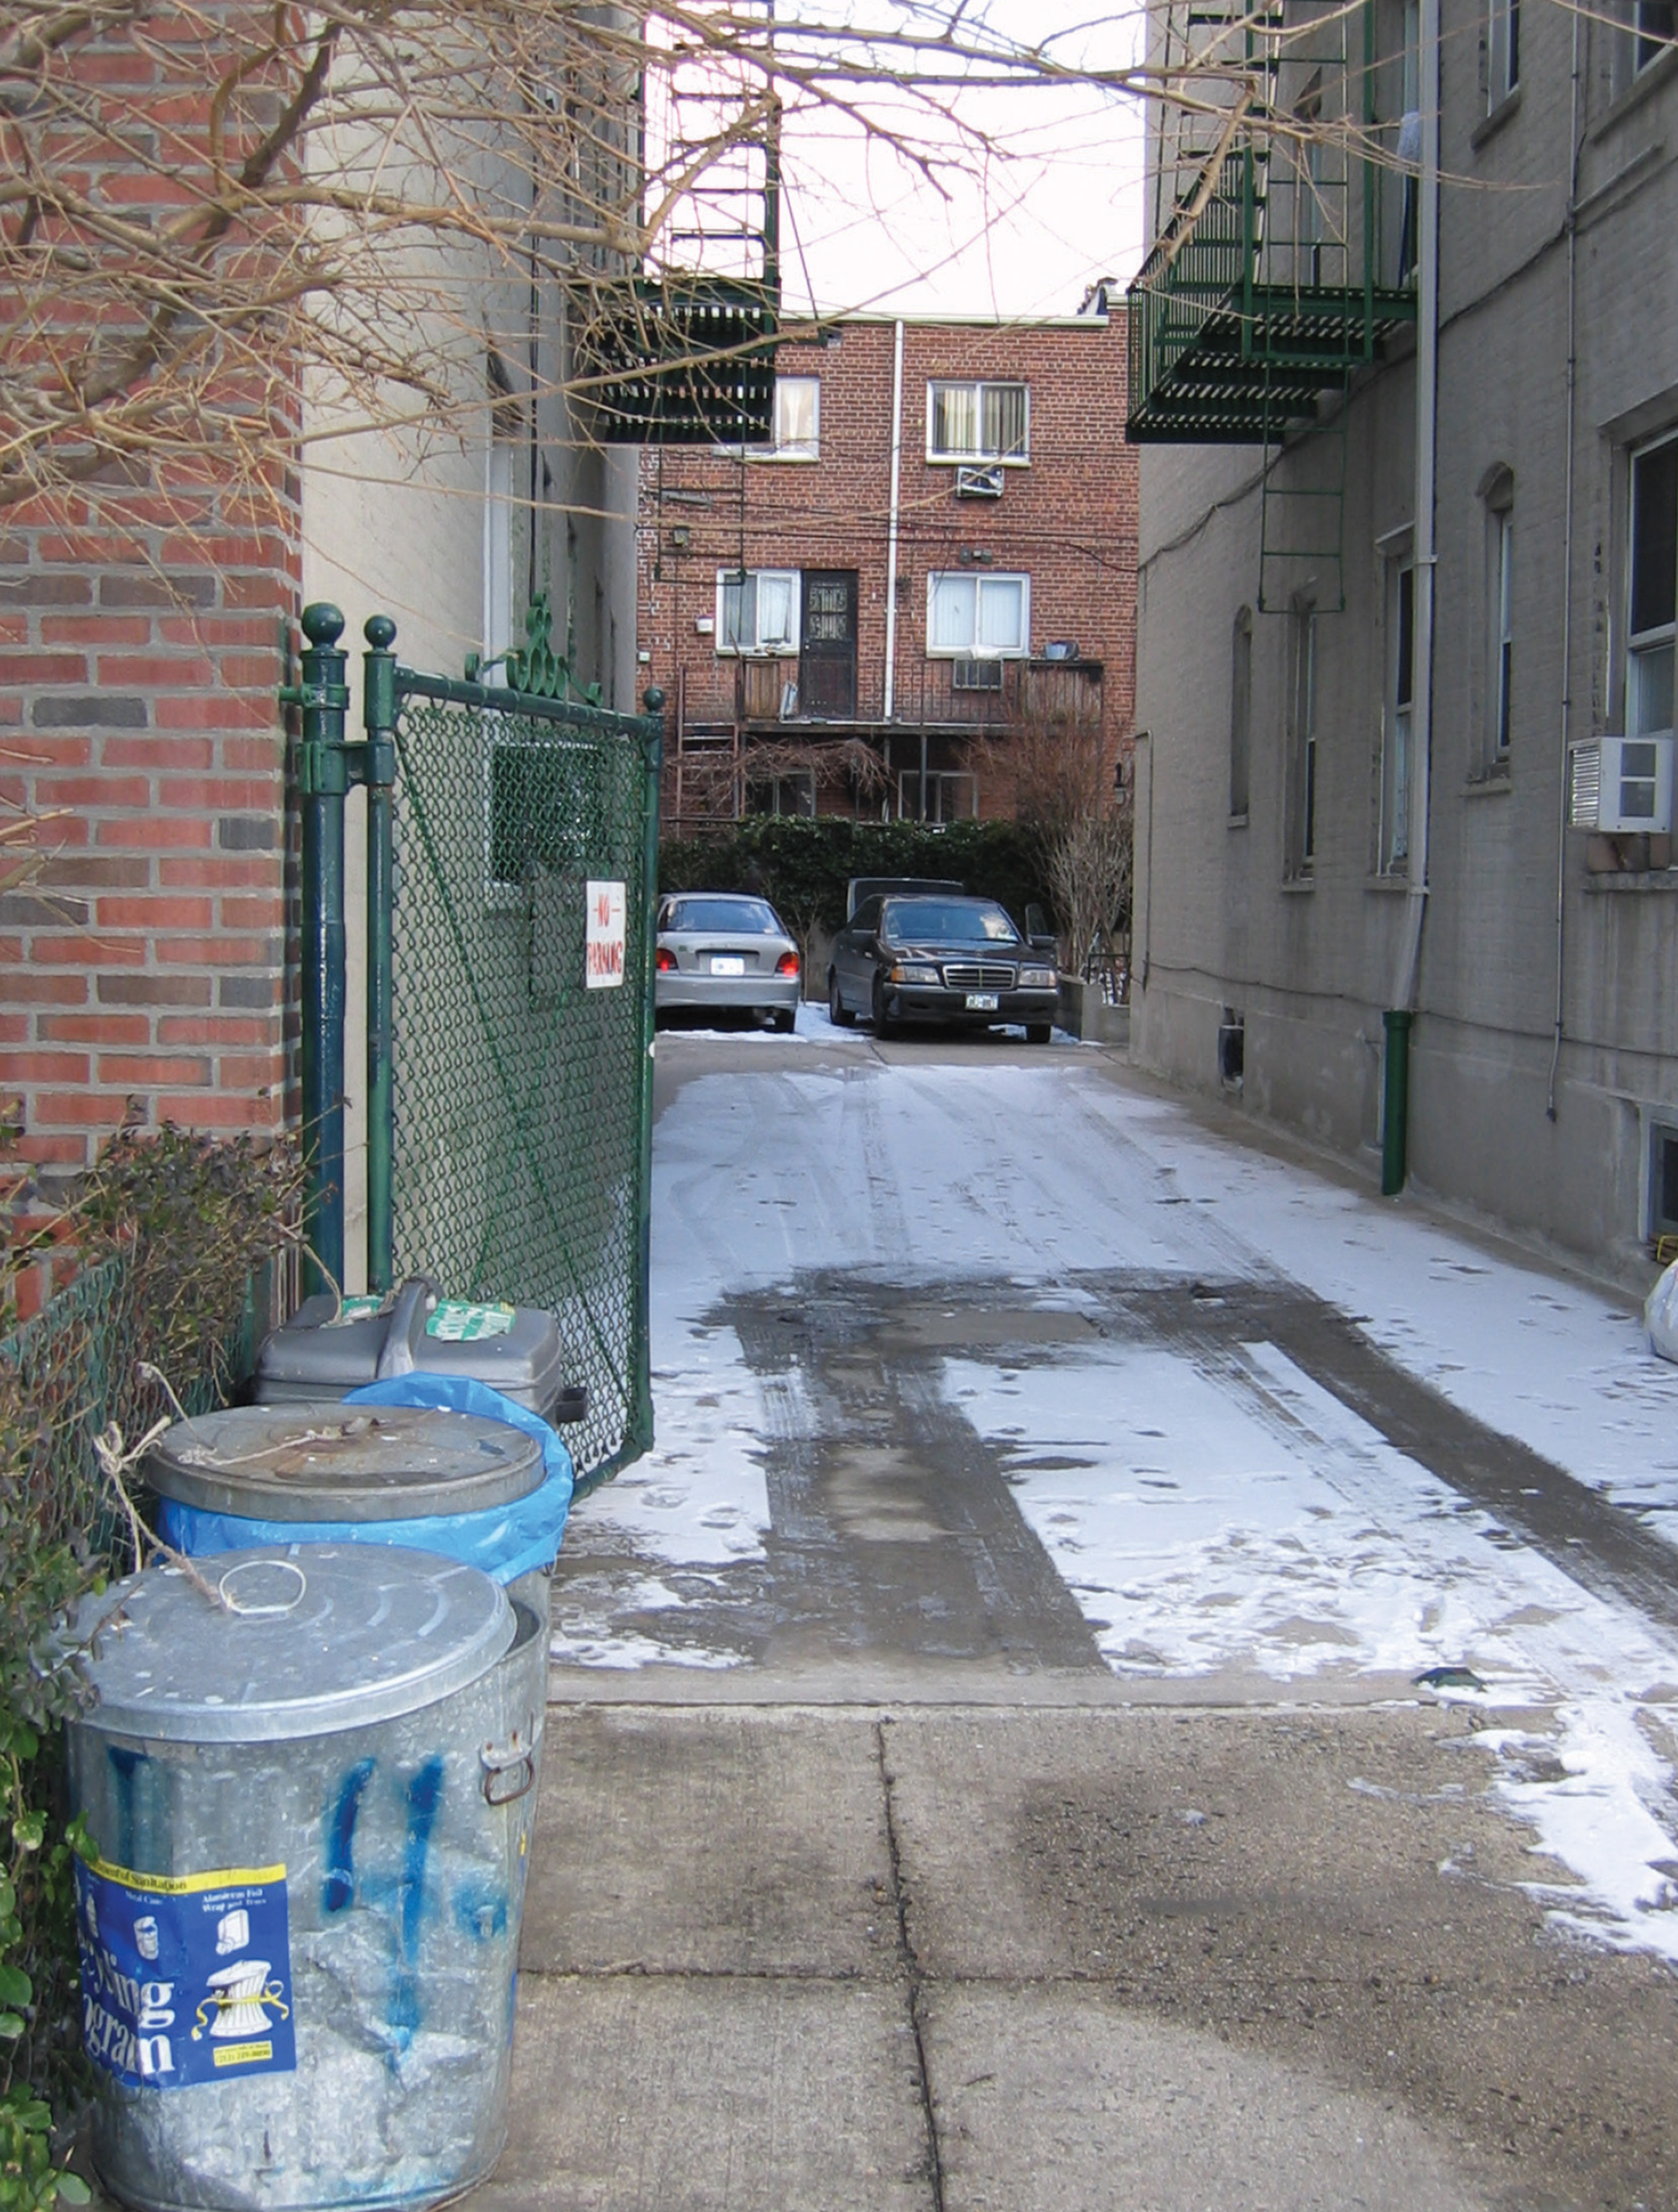 7. Block 2286, lot 110, Queens
On 48th St between 47th Ave and 48th Ave